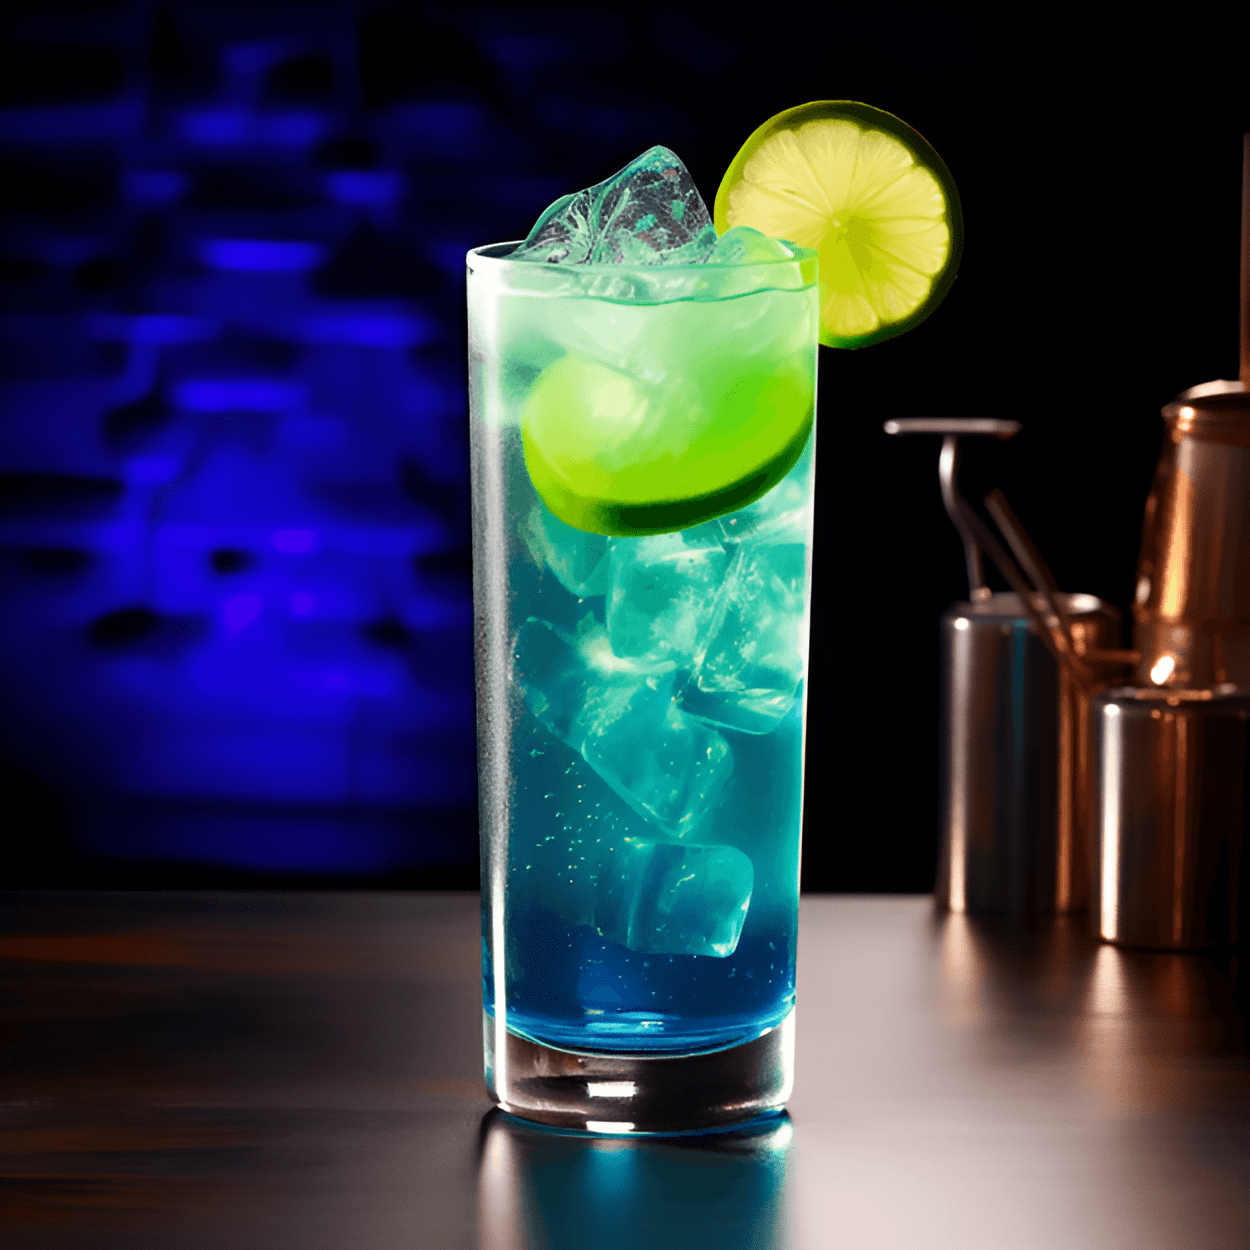 Trashcan Cocktail Recipe - The Trashcan is a sweet, fruity cocktail with a strong alcoholic kick. It has a vibrant, electric blue color and a refreshing, citrusy taste. The combination of different spirits gives it a complex flavor profile, with notes of gin, vodka, rum, and tequila all coming through.